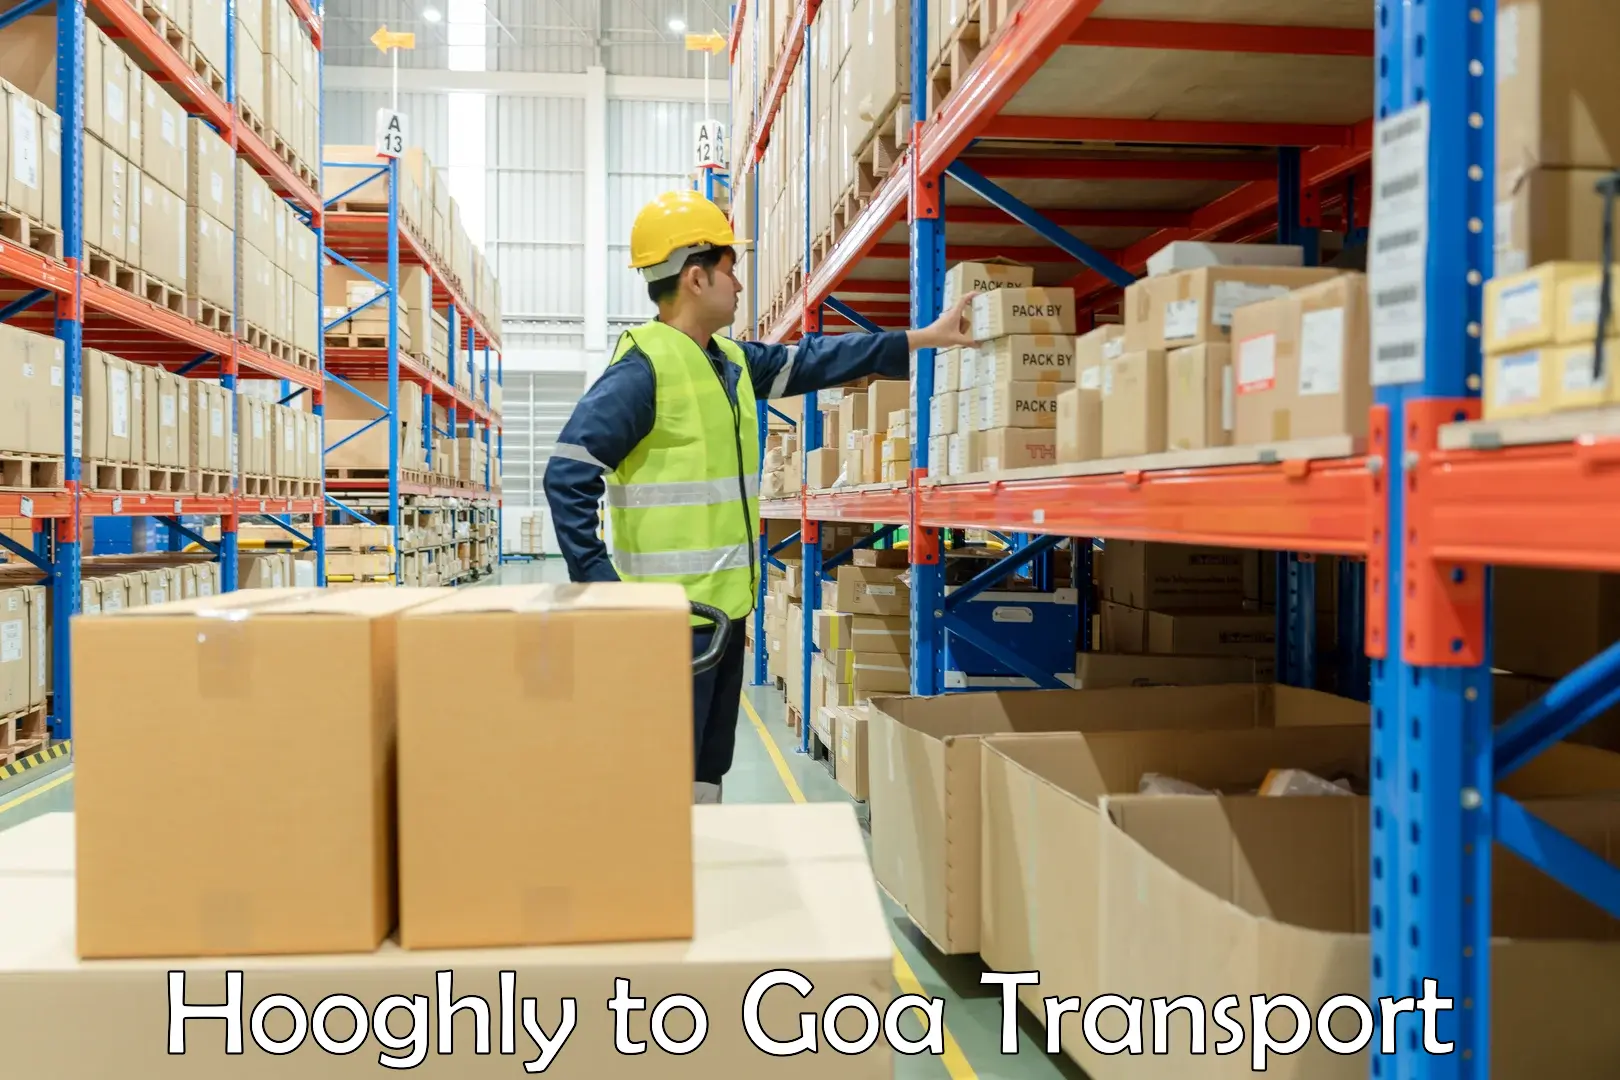 Lorry transport service Hooghly to Goa University